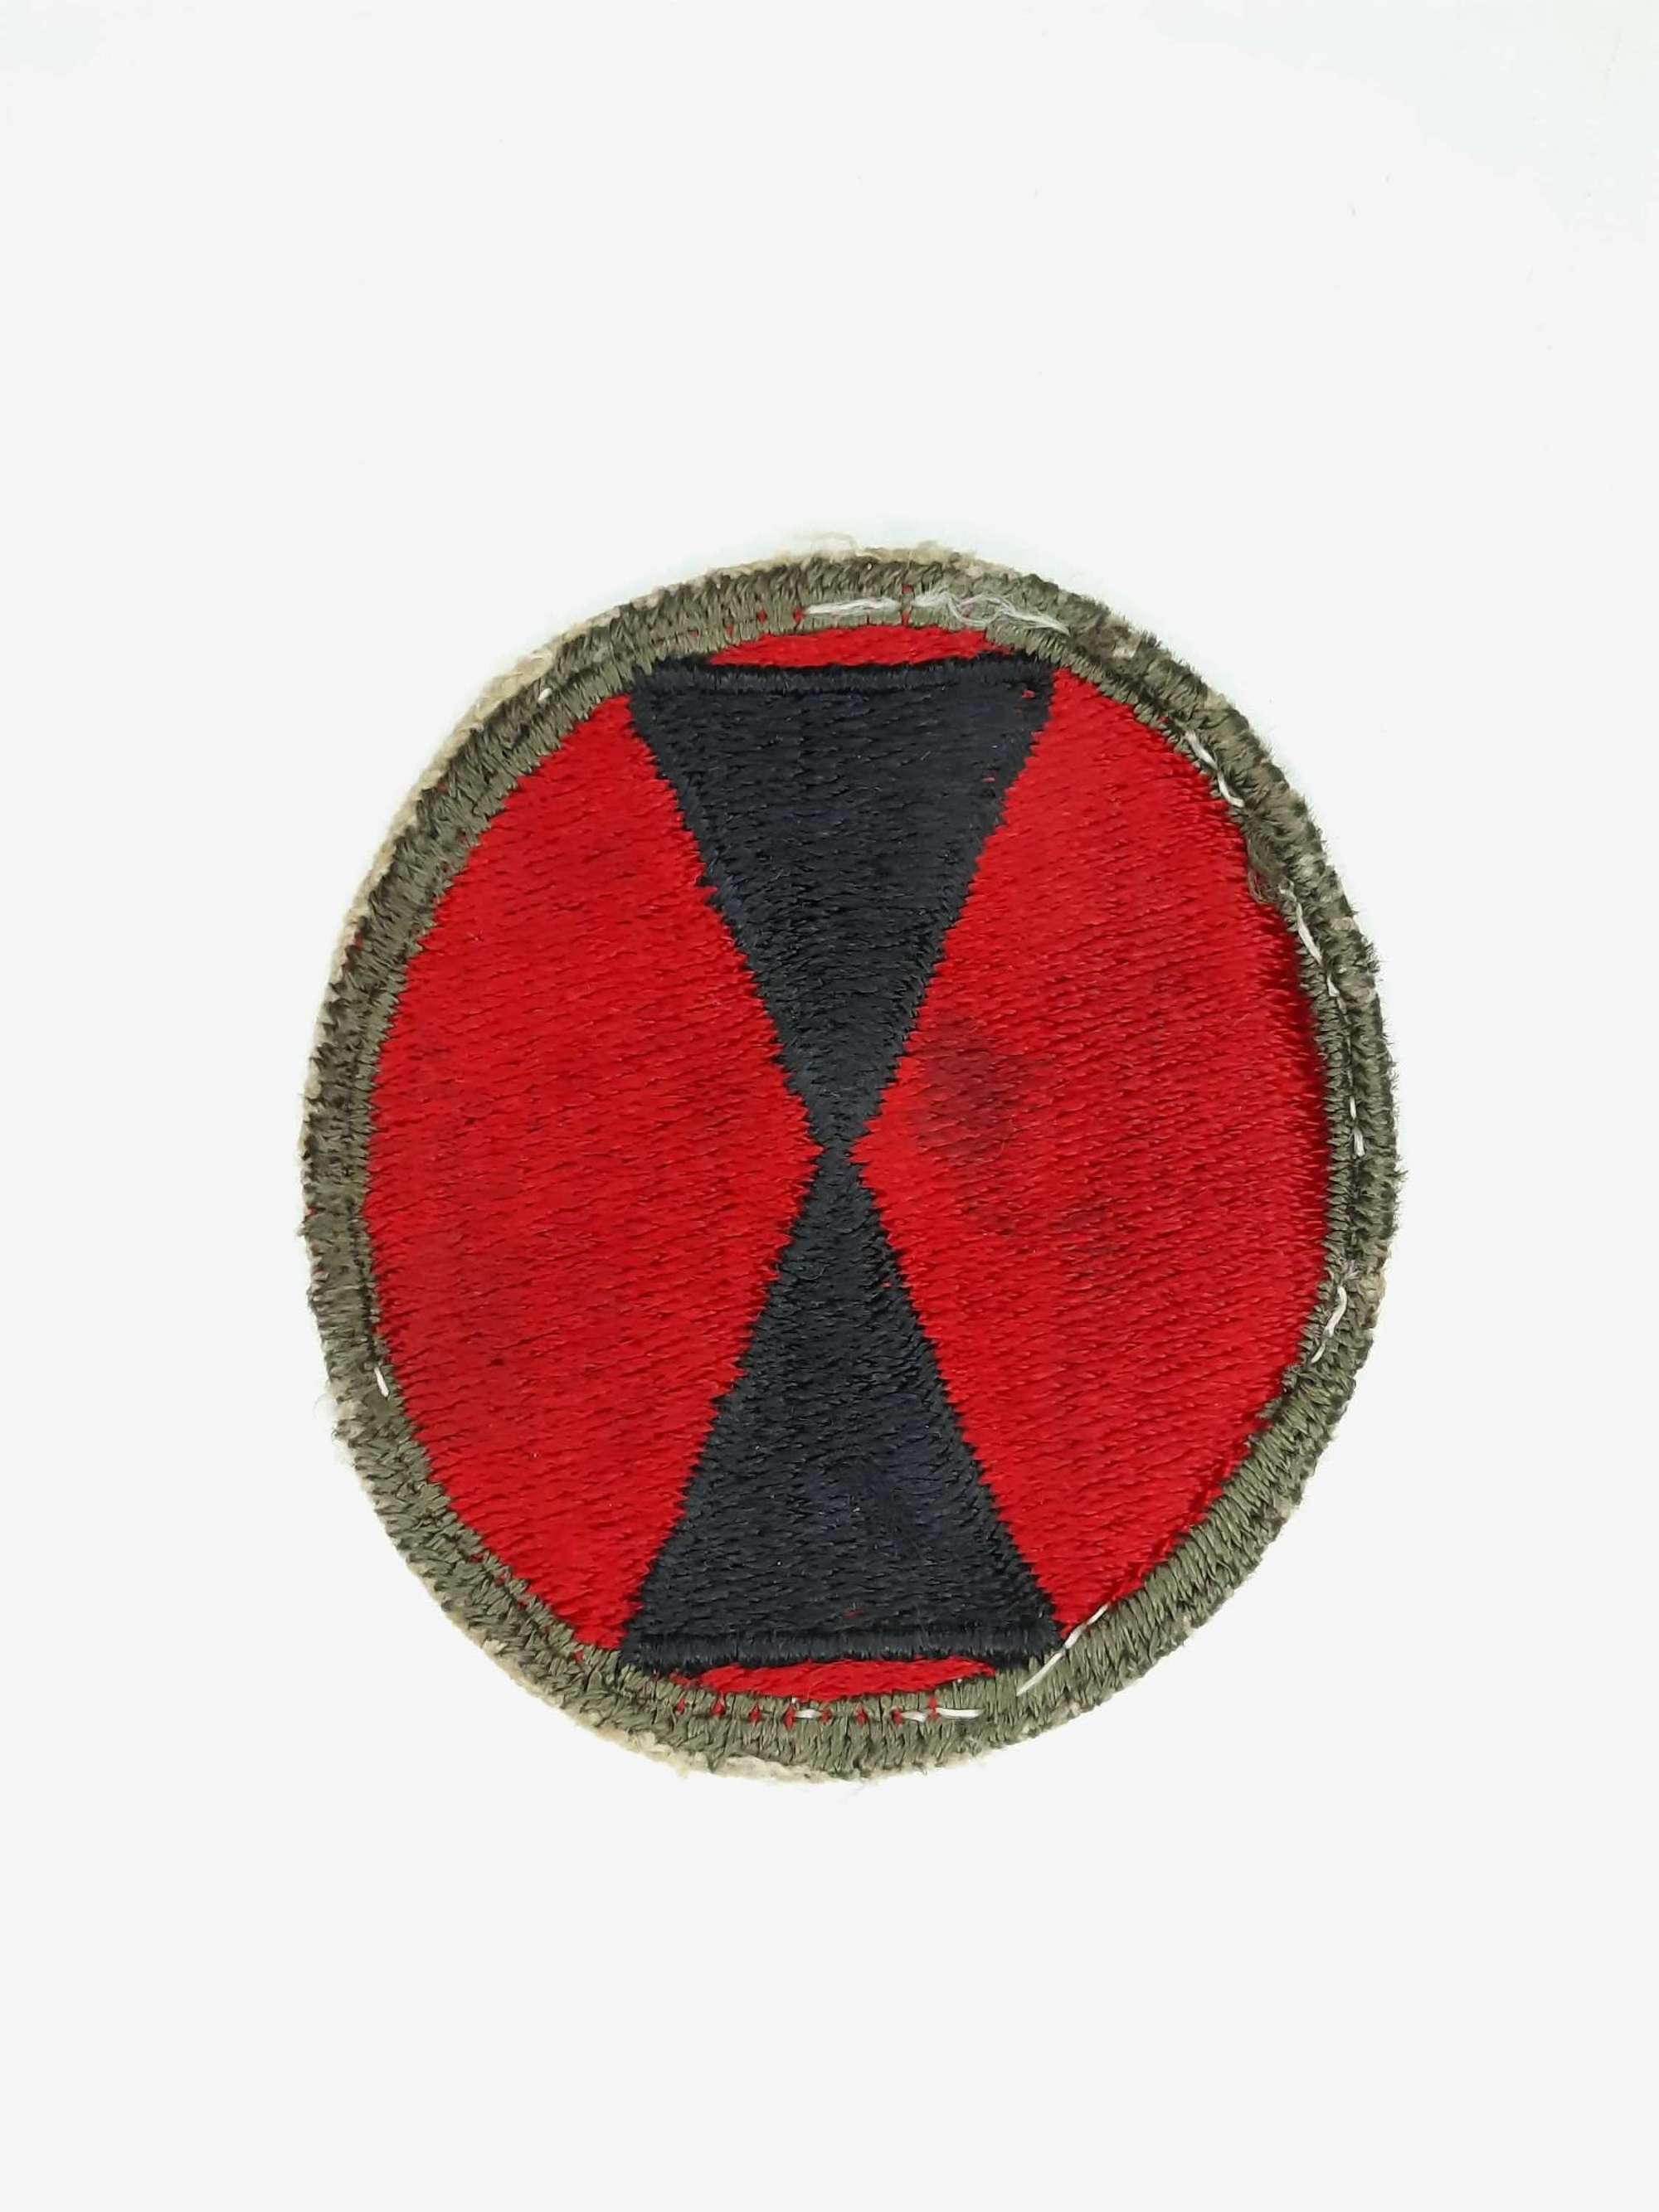 WW2 US 7th Infantry Division Patch